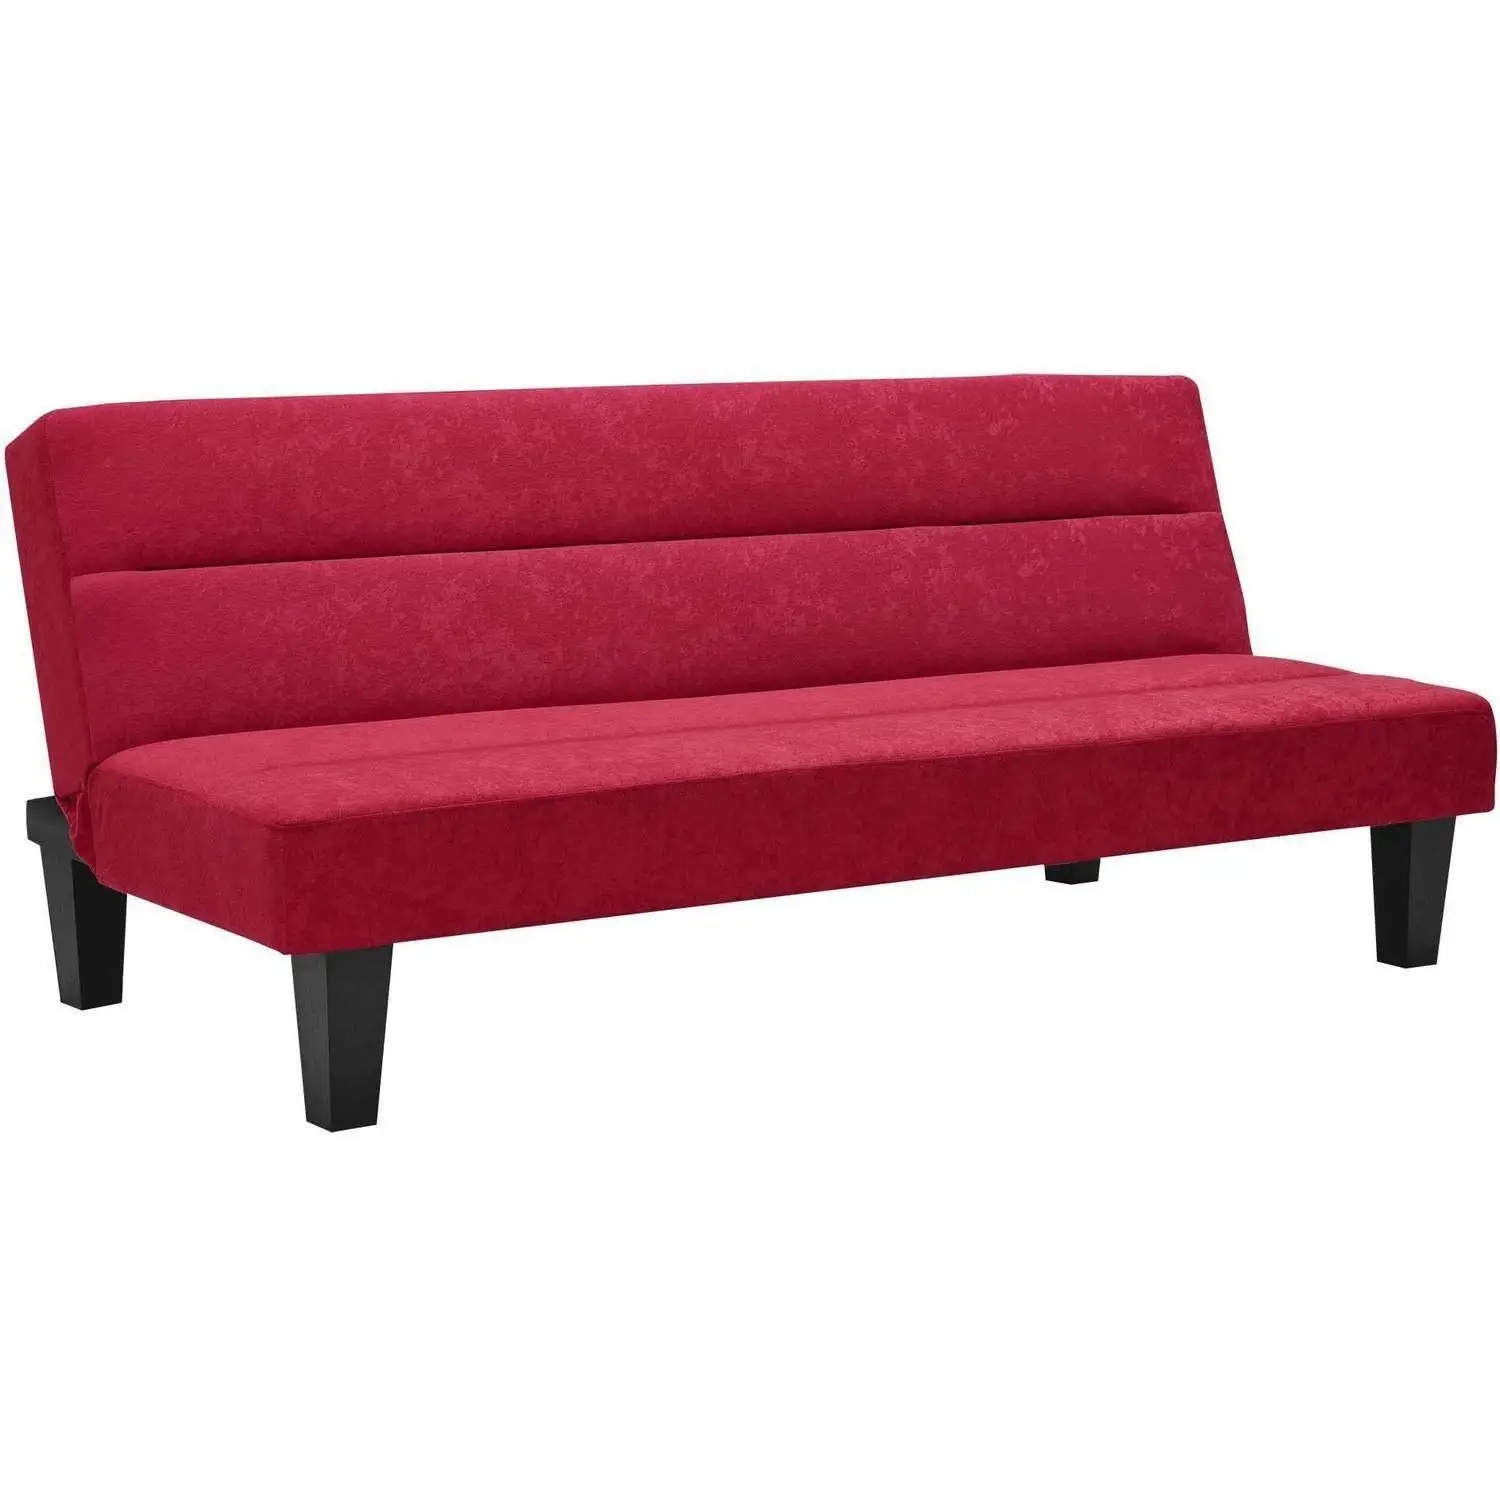 Cheap Sofa Bed Philippines Modern, find Sofa Bed Philippines Modern